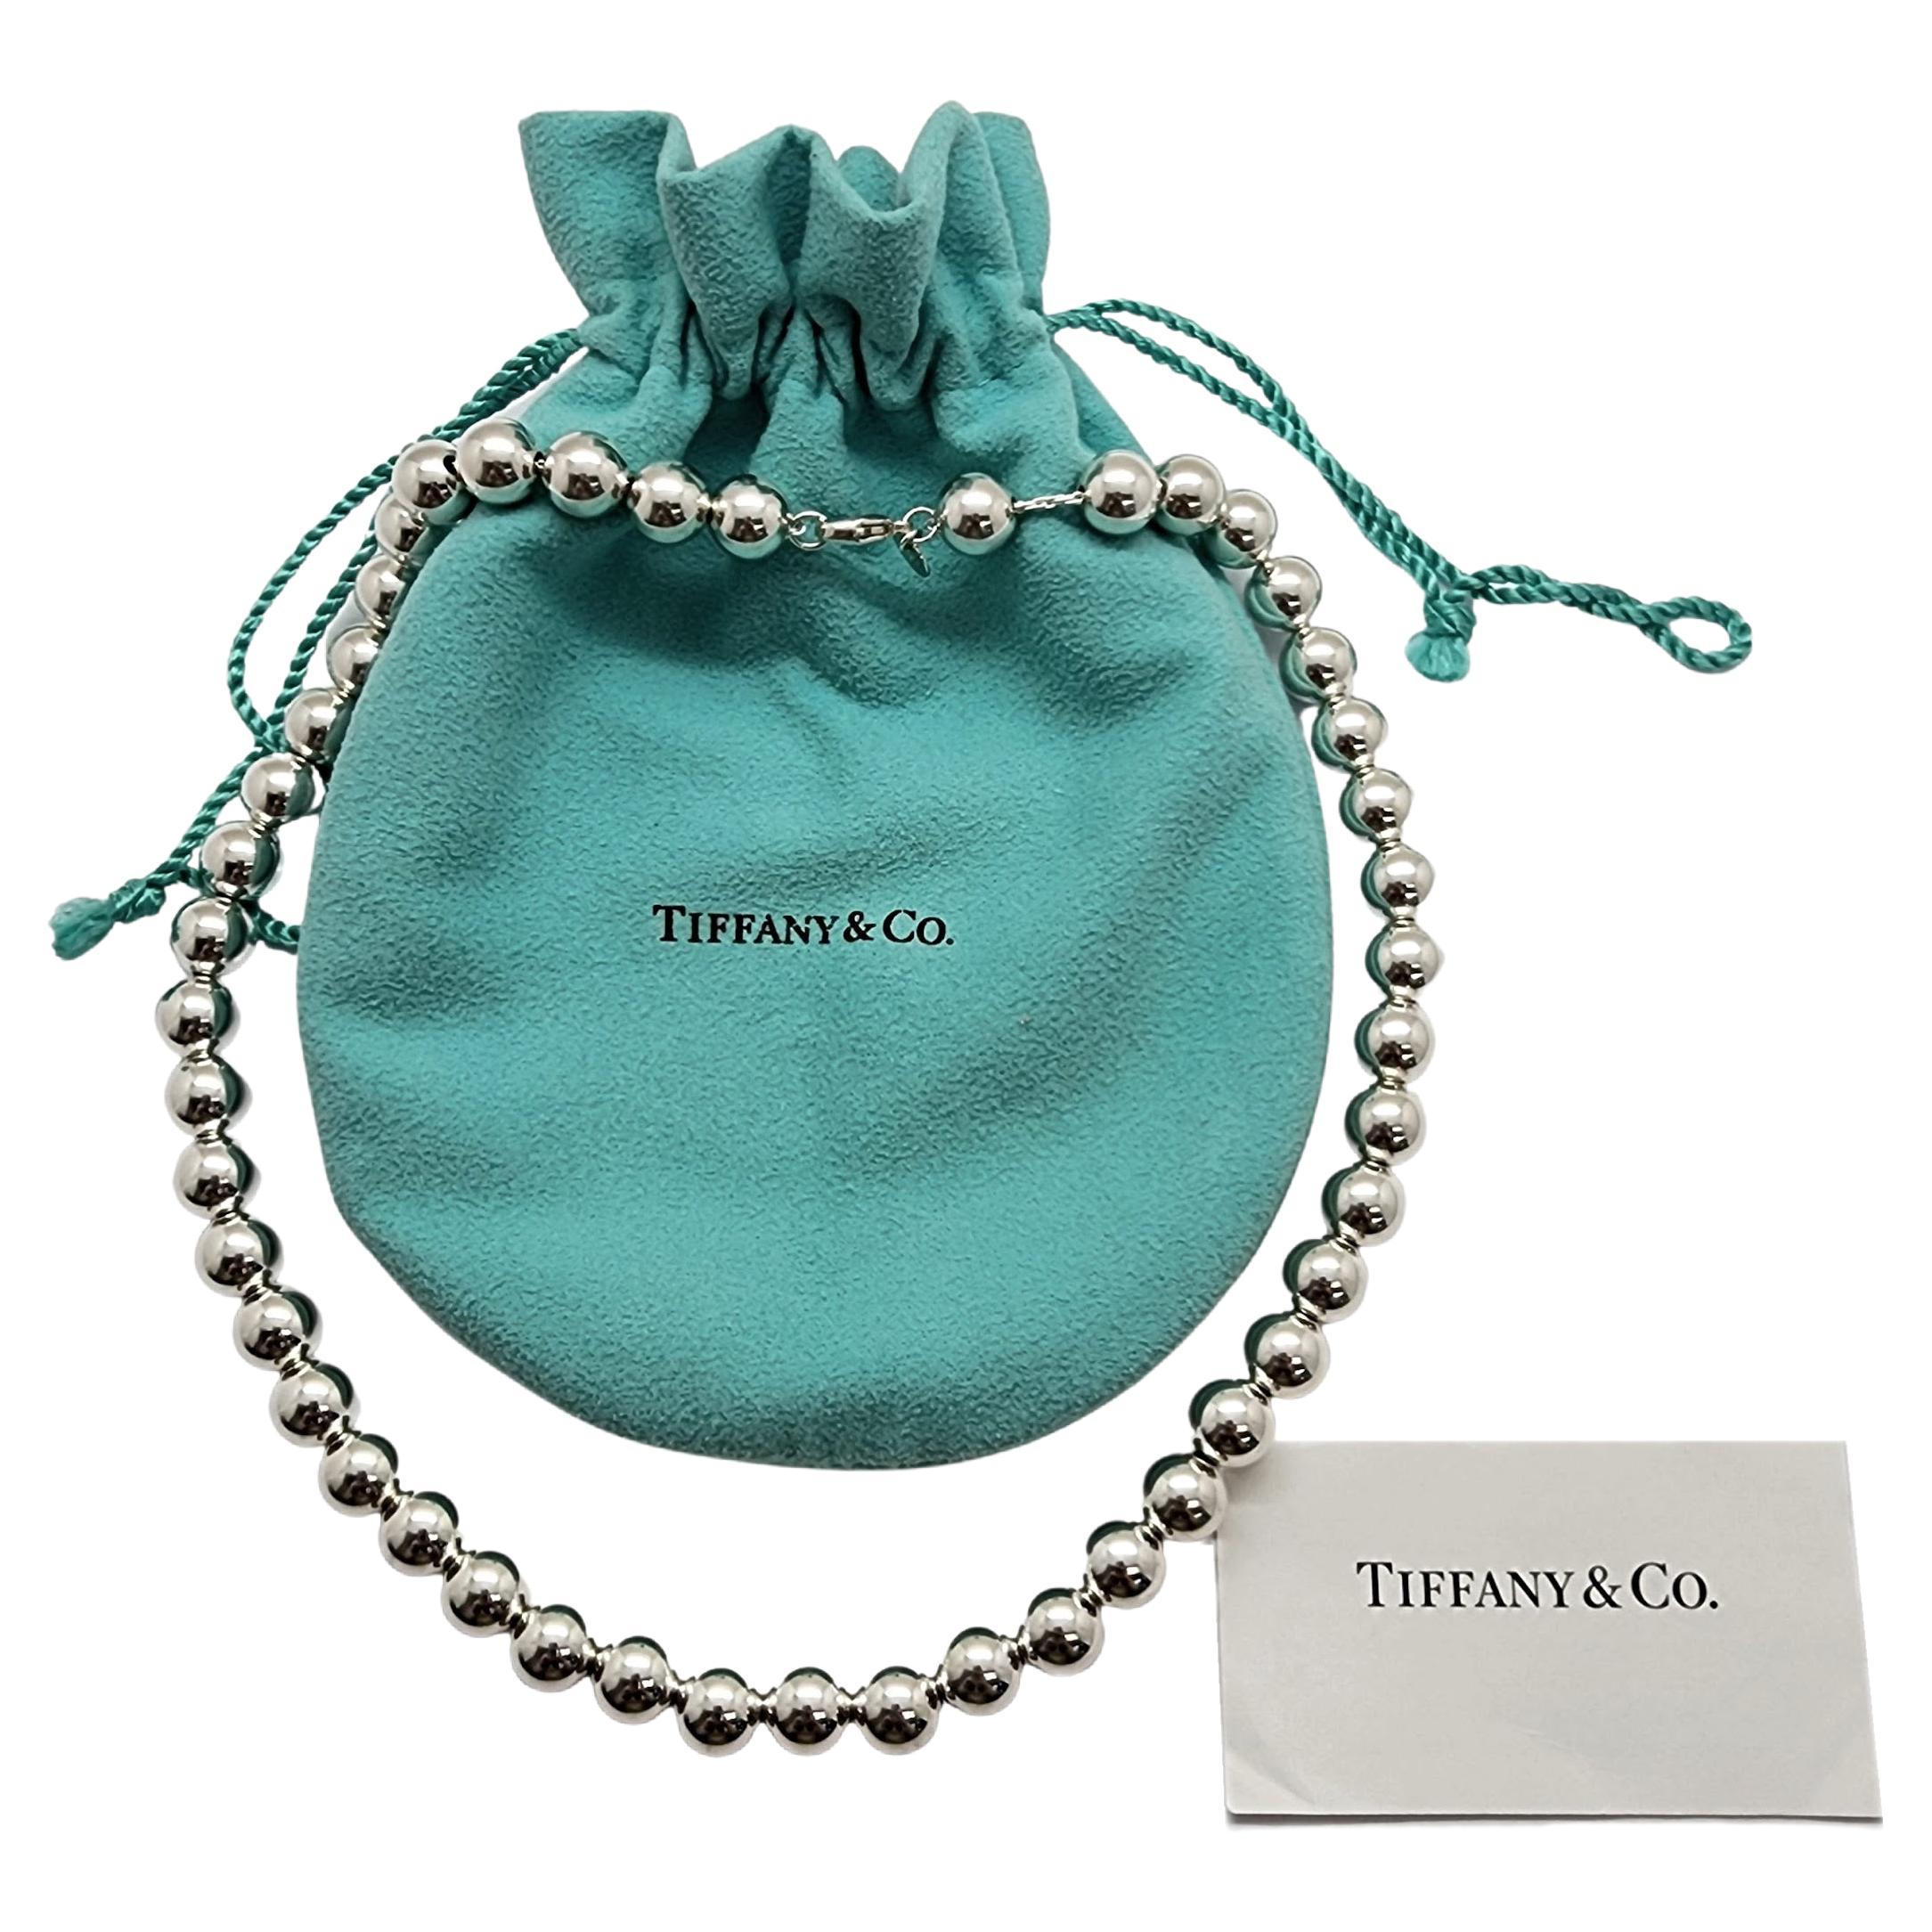 Tiffany & Co. Hardwear Sterling Silver Ball Necklace with Pouch